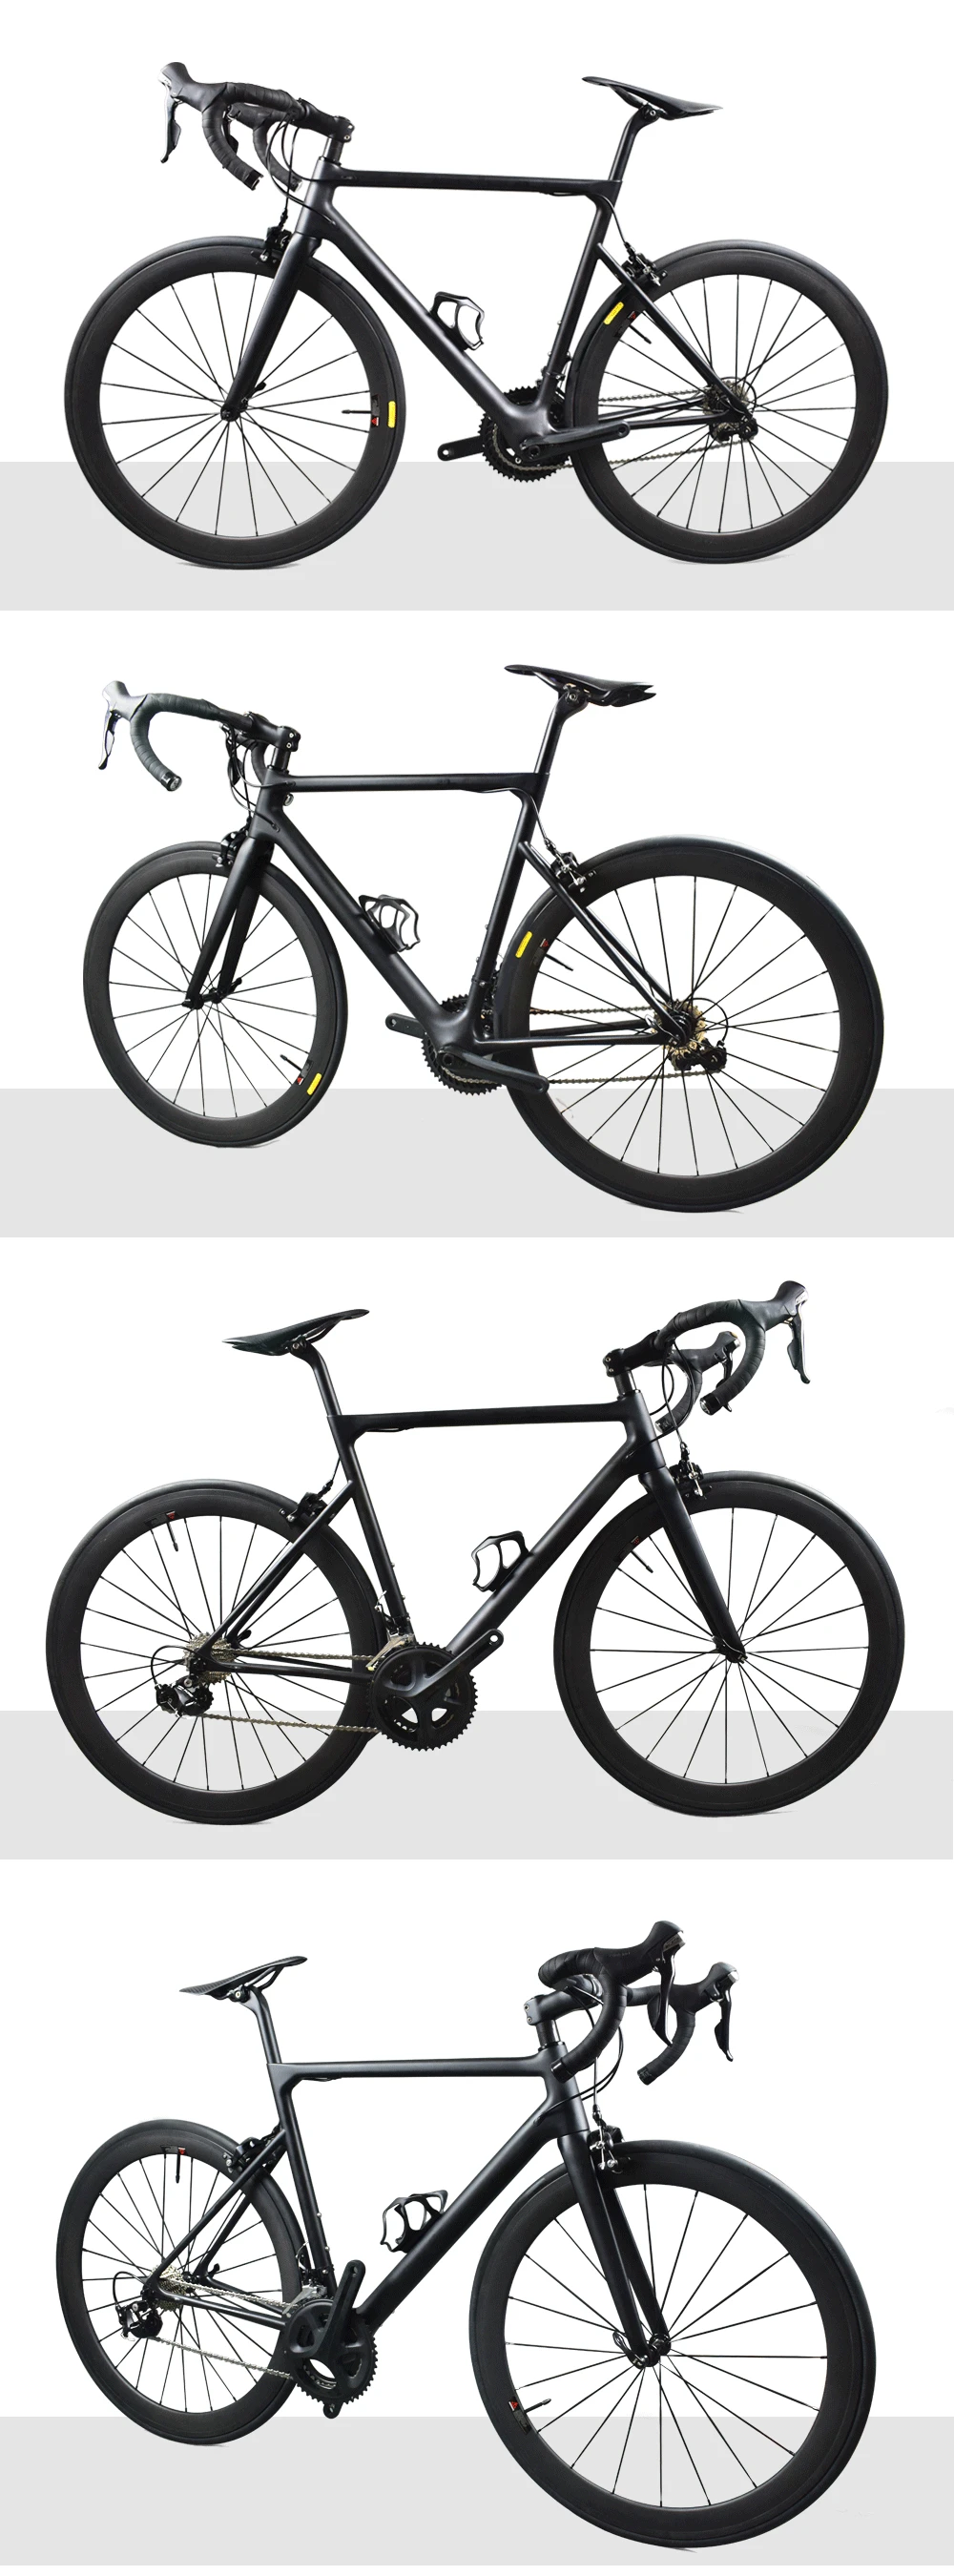 Clearance Airwolf 700C Carbon Bike Toray T1000 Carbon road bicycle with monocoque frameset,carbon wheels,SH1MANO 5800/R800/9000 bicicleta 8